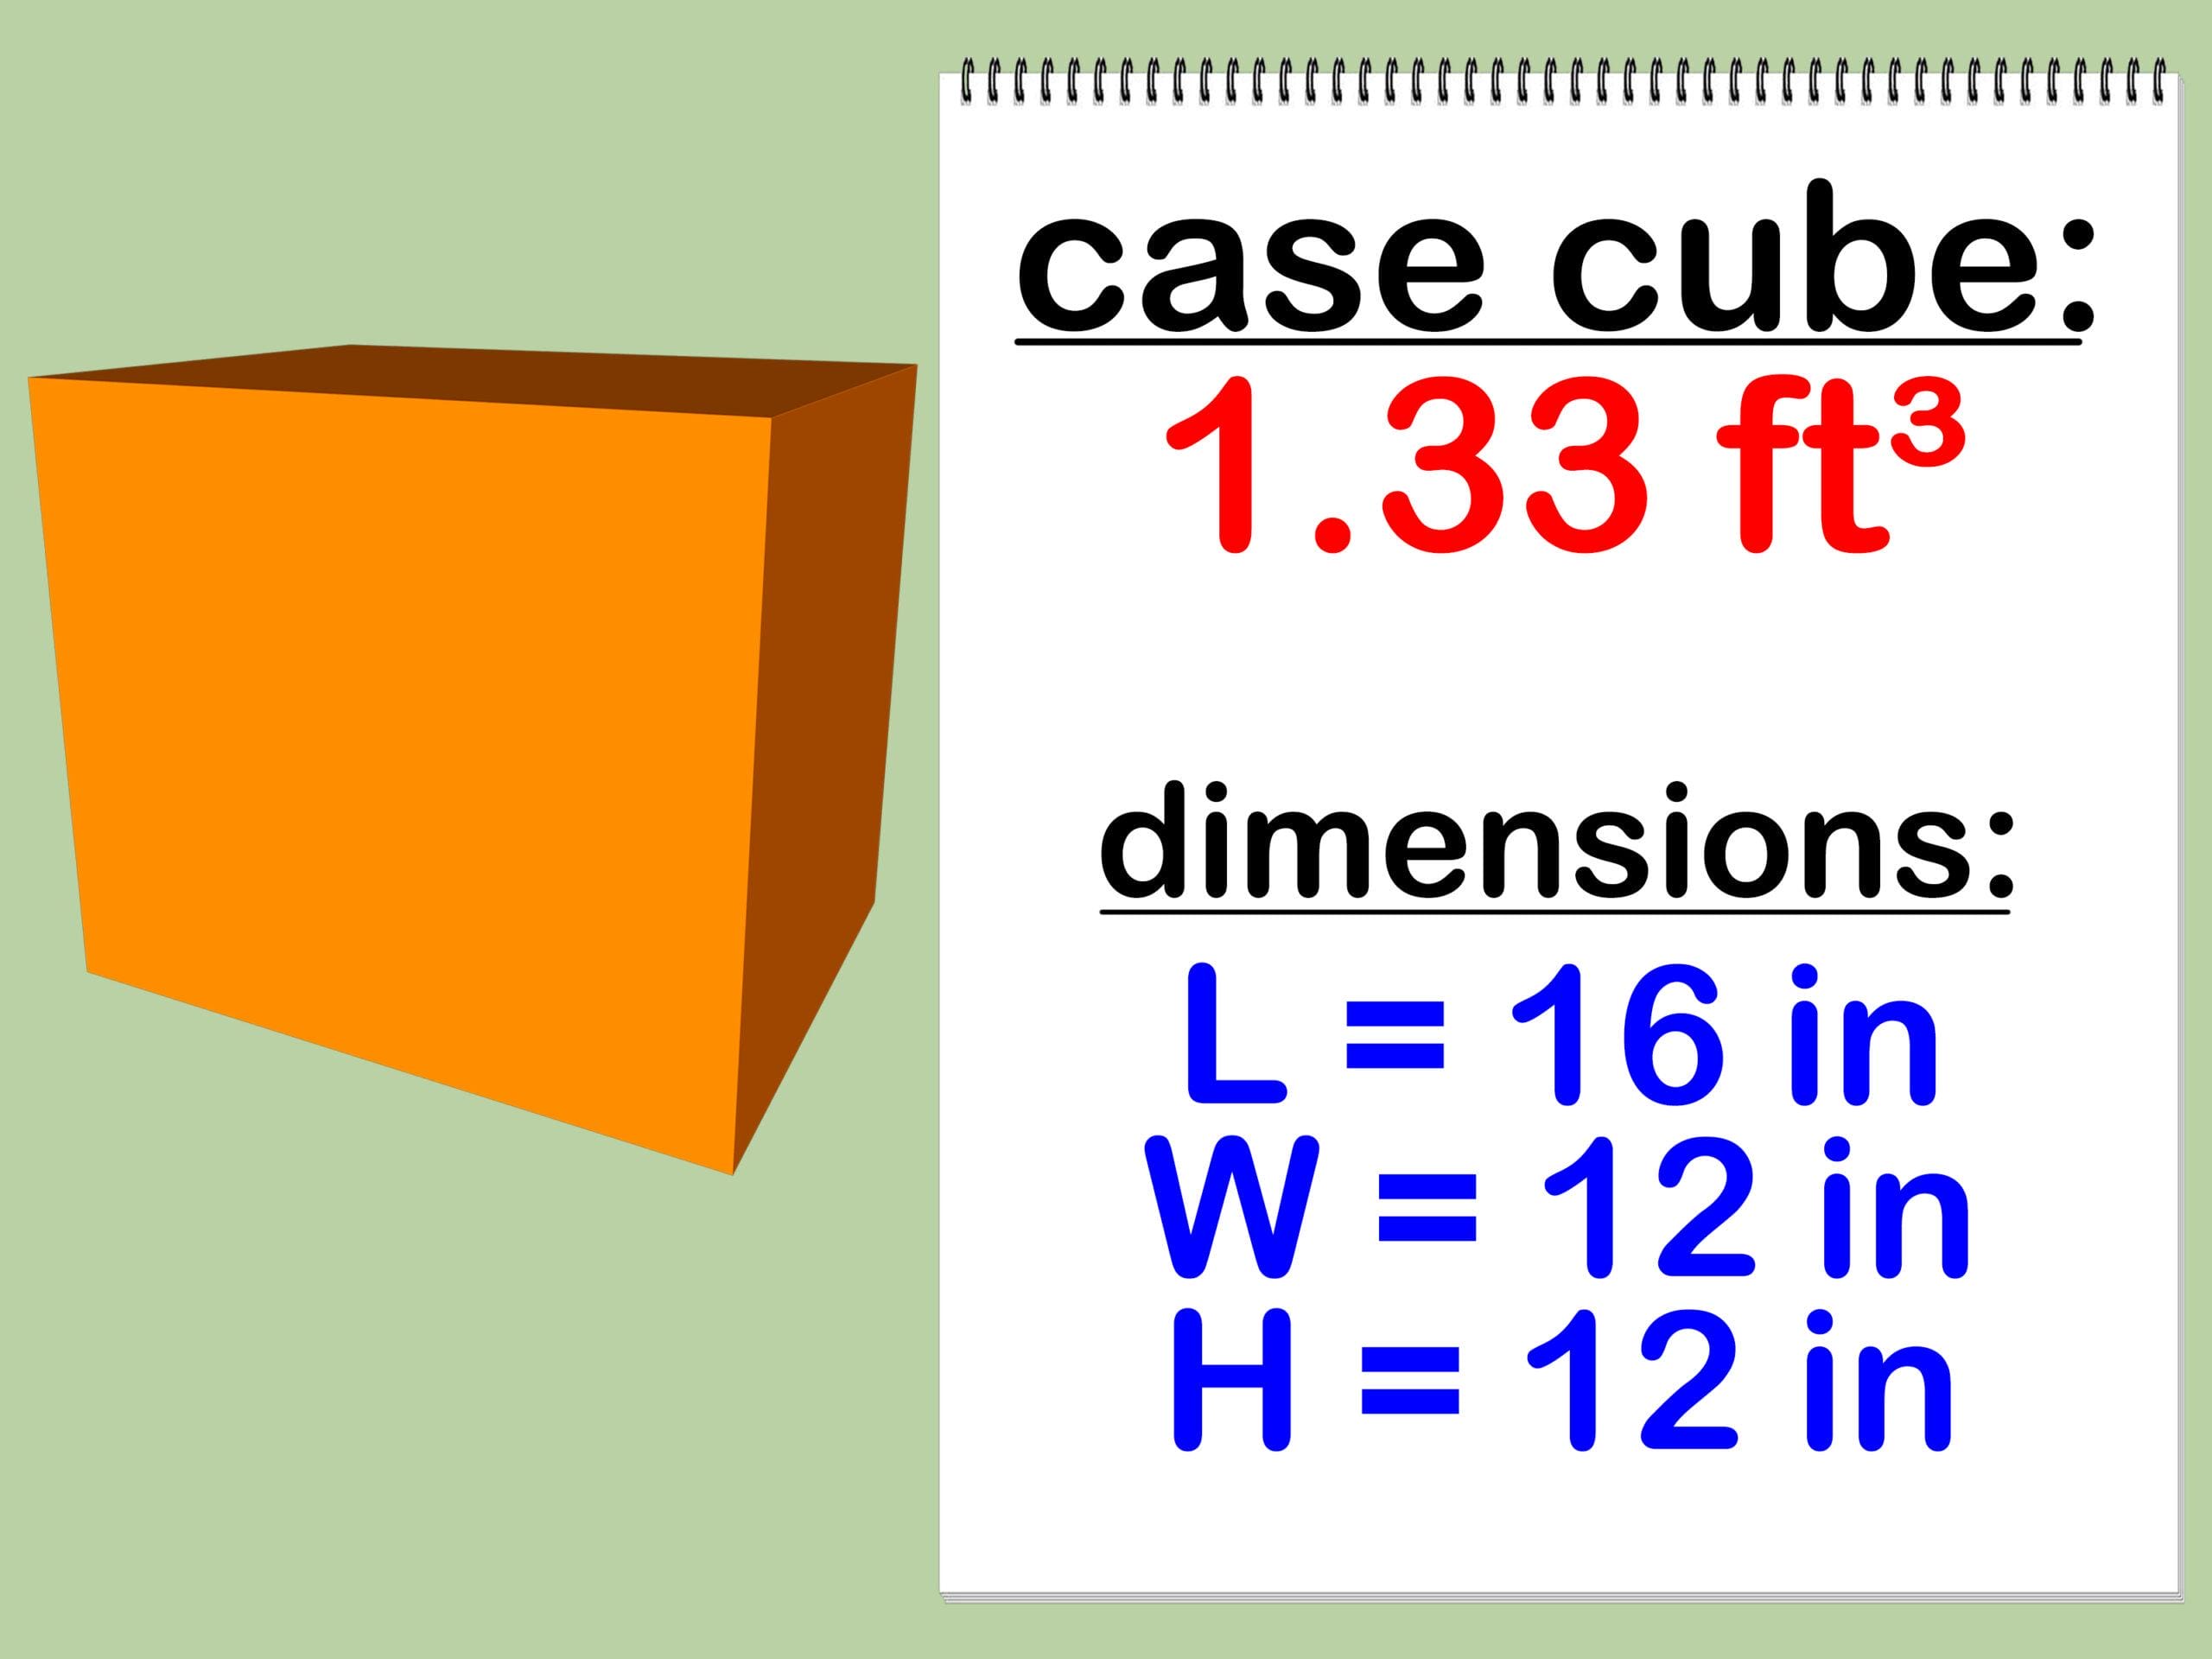 How to Calculate the Case Cube of a Box